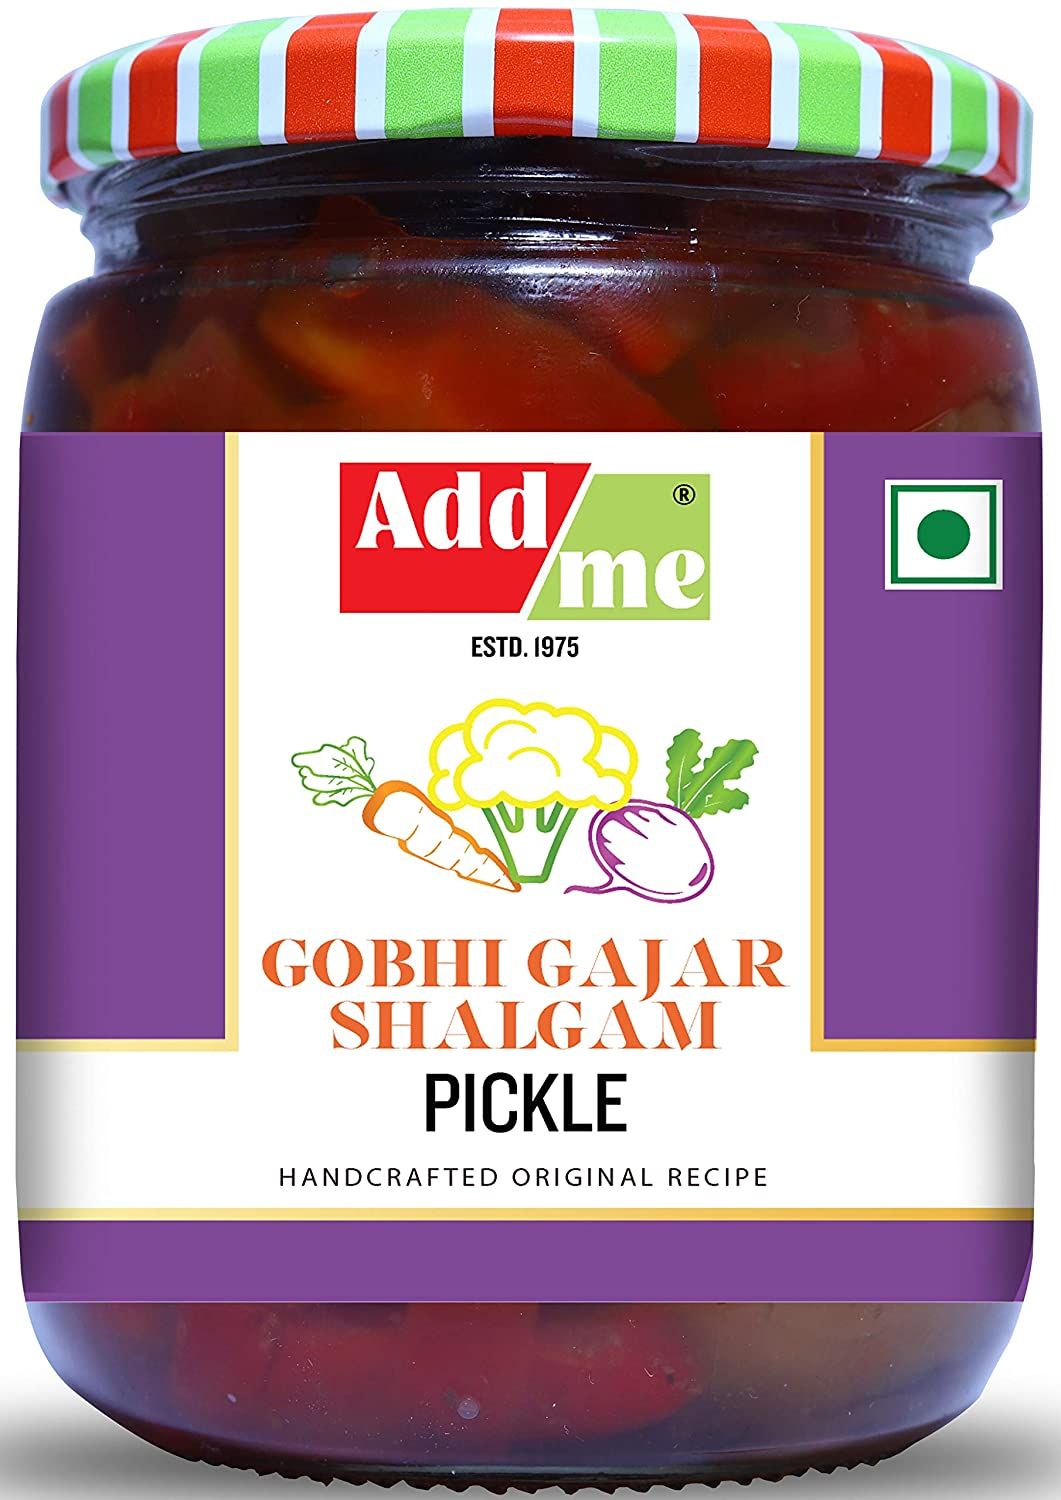 Add Me Sweet & Sour Mixed Pickle Image